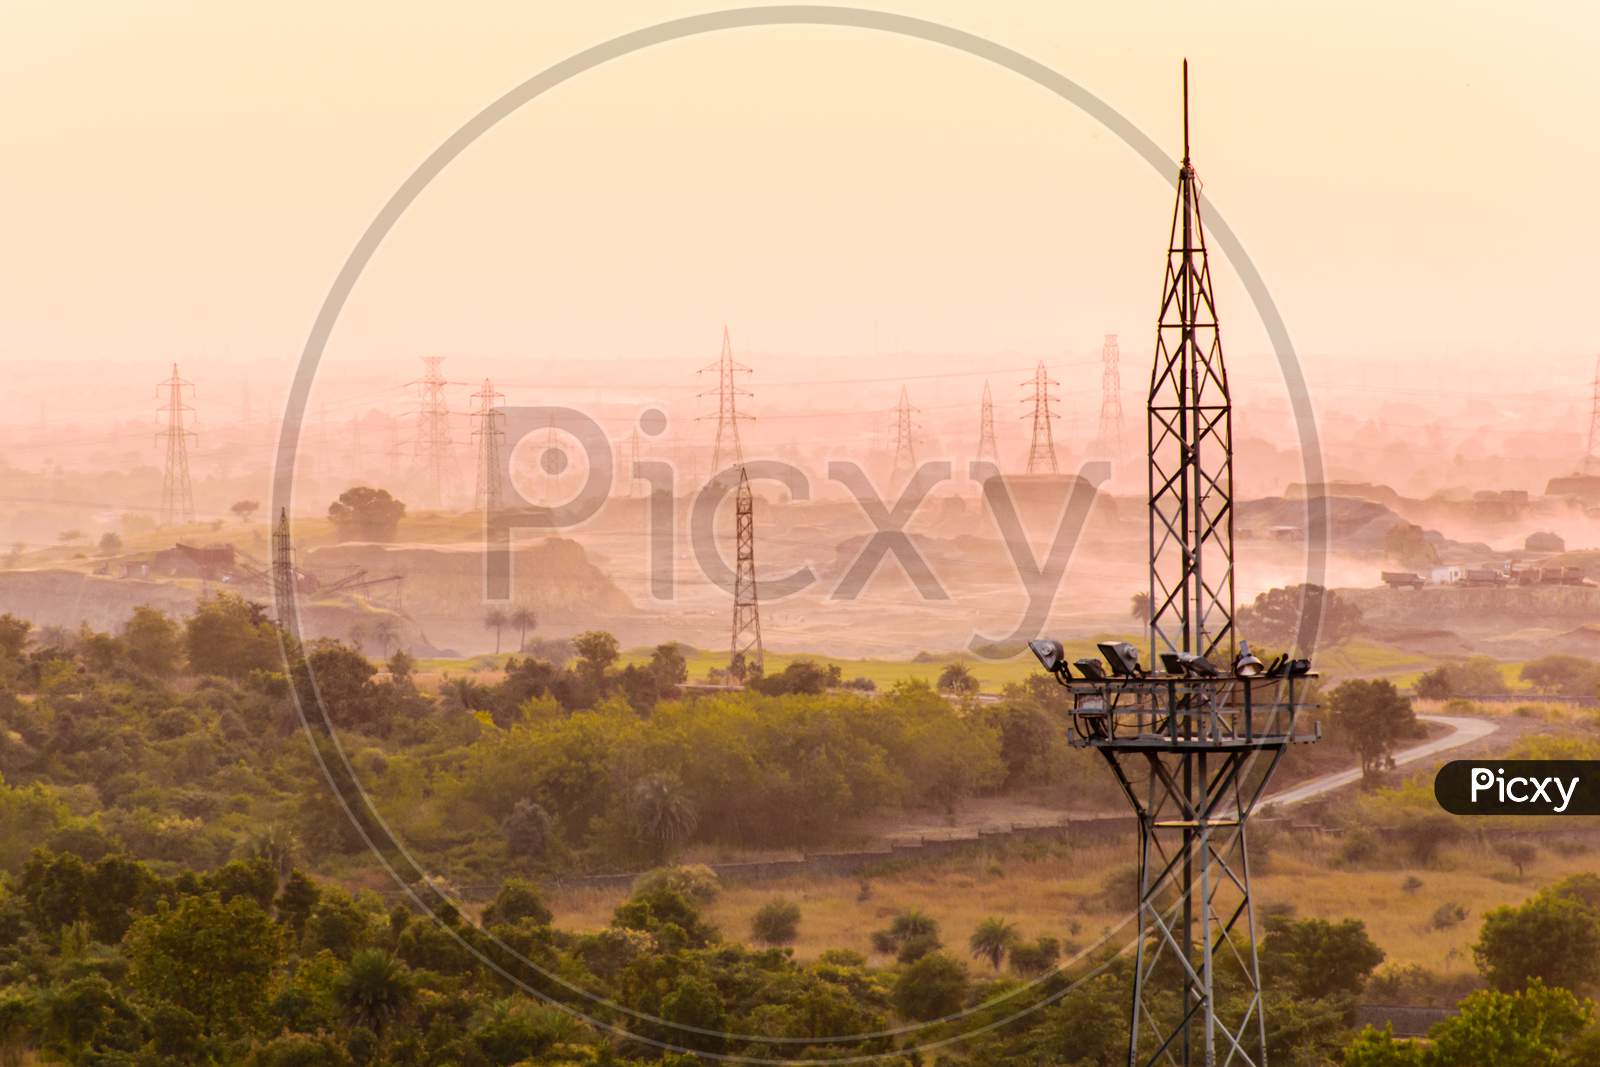 Electrical Power Distribution Towers In Misty Landscape.